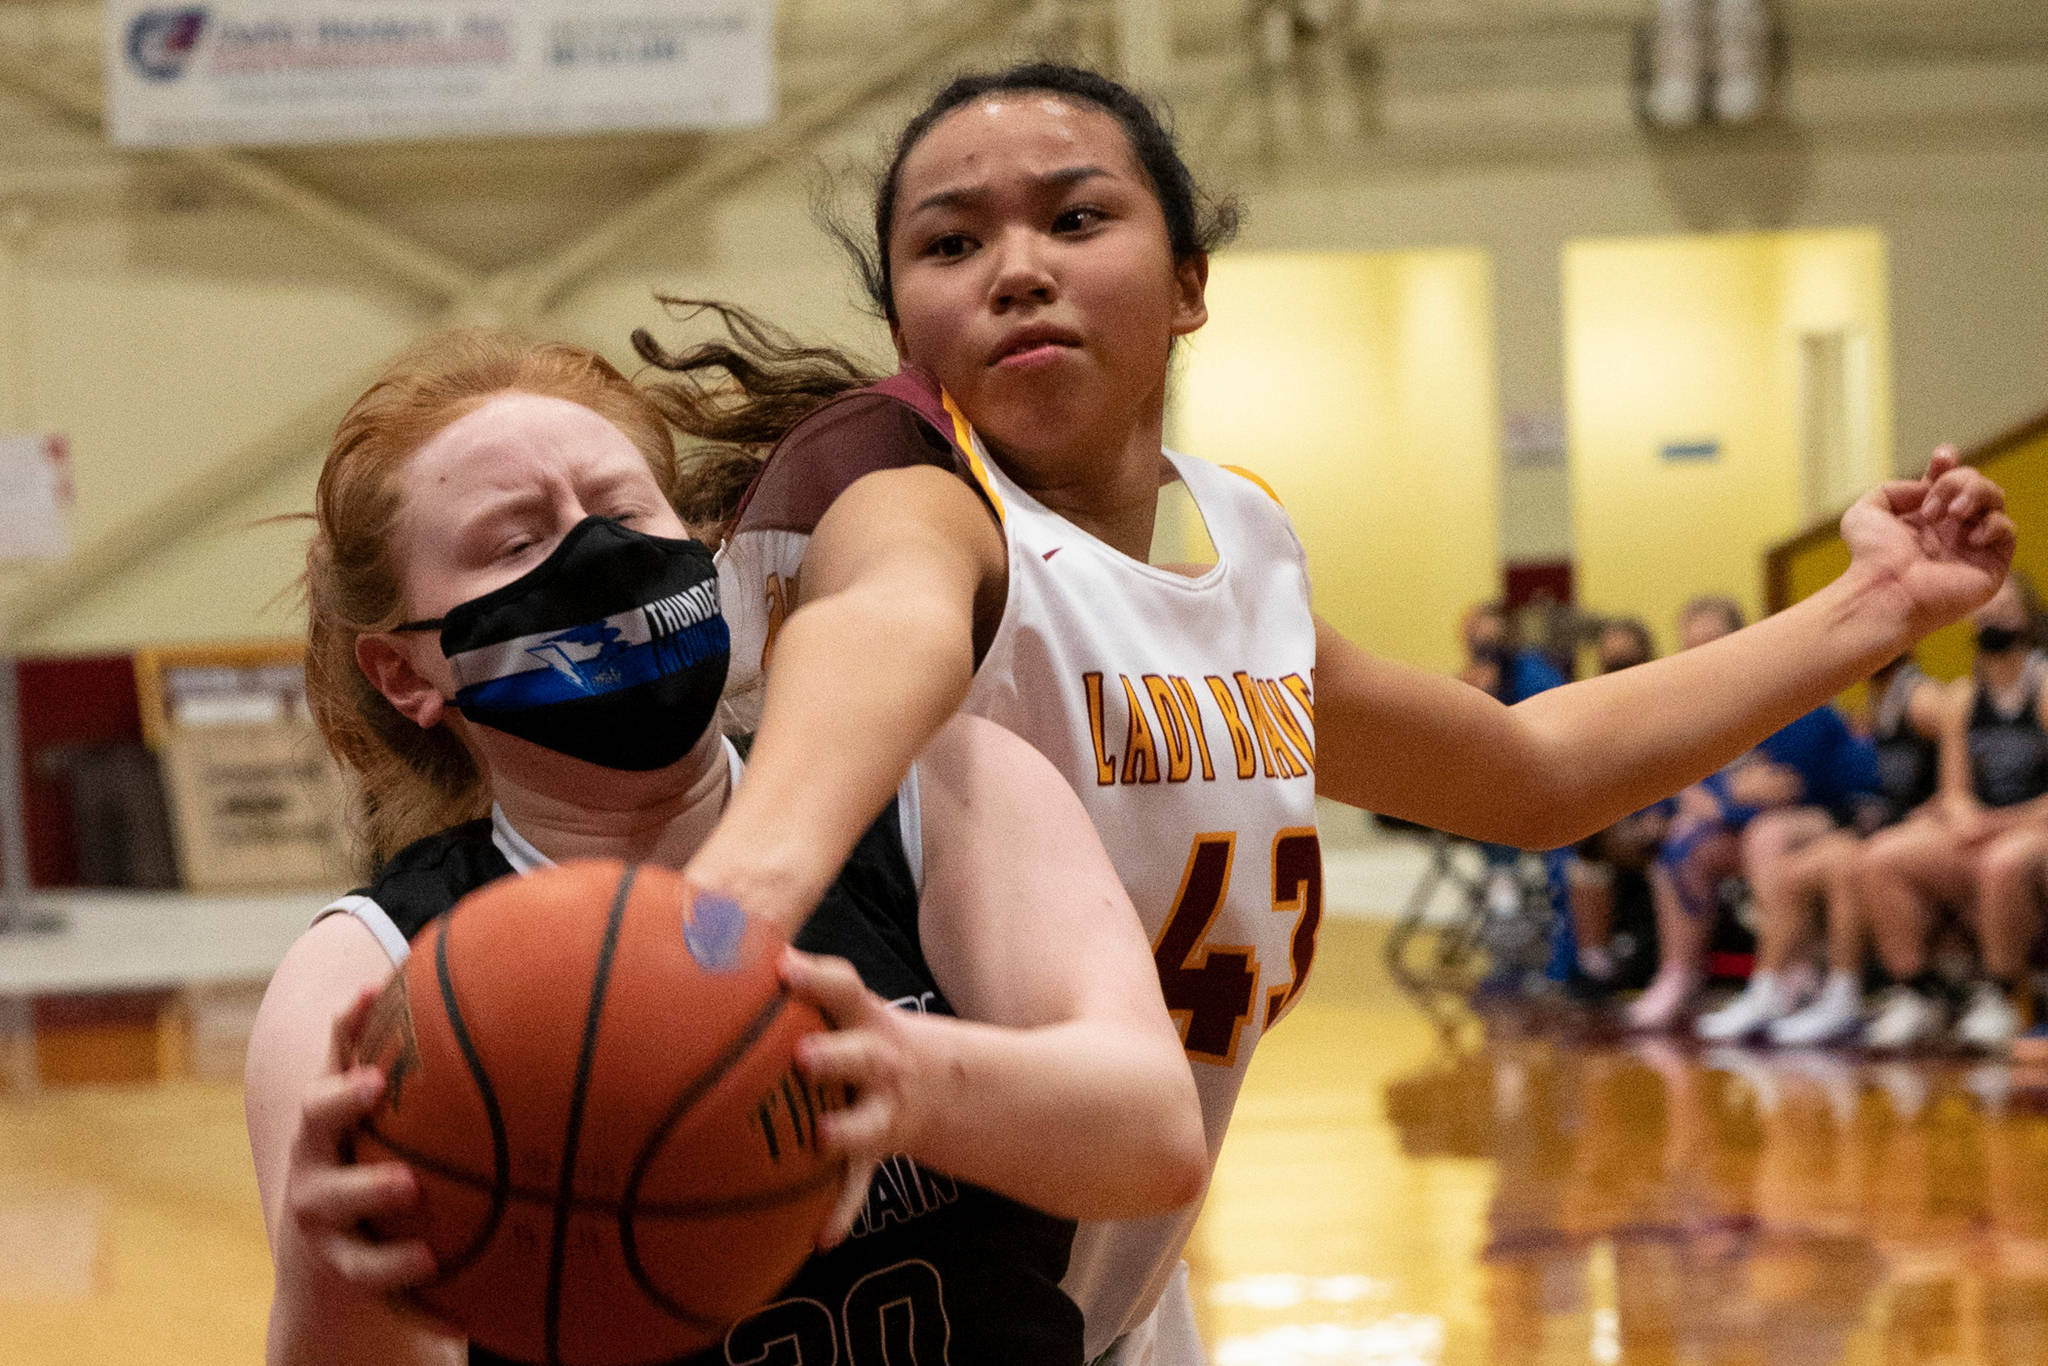 Thunder Mountain High School player Mackenzie Gray, left, competes with Mt. Edgecumbe High Schoool in Sitka on Saturday, Feb. 6, 2021. (Sitka Sentinel / James Poulson)